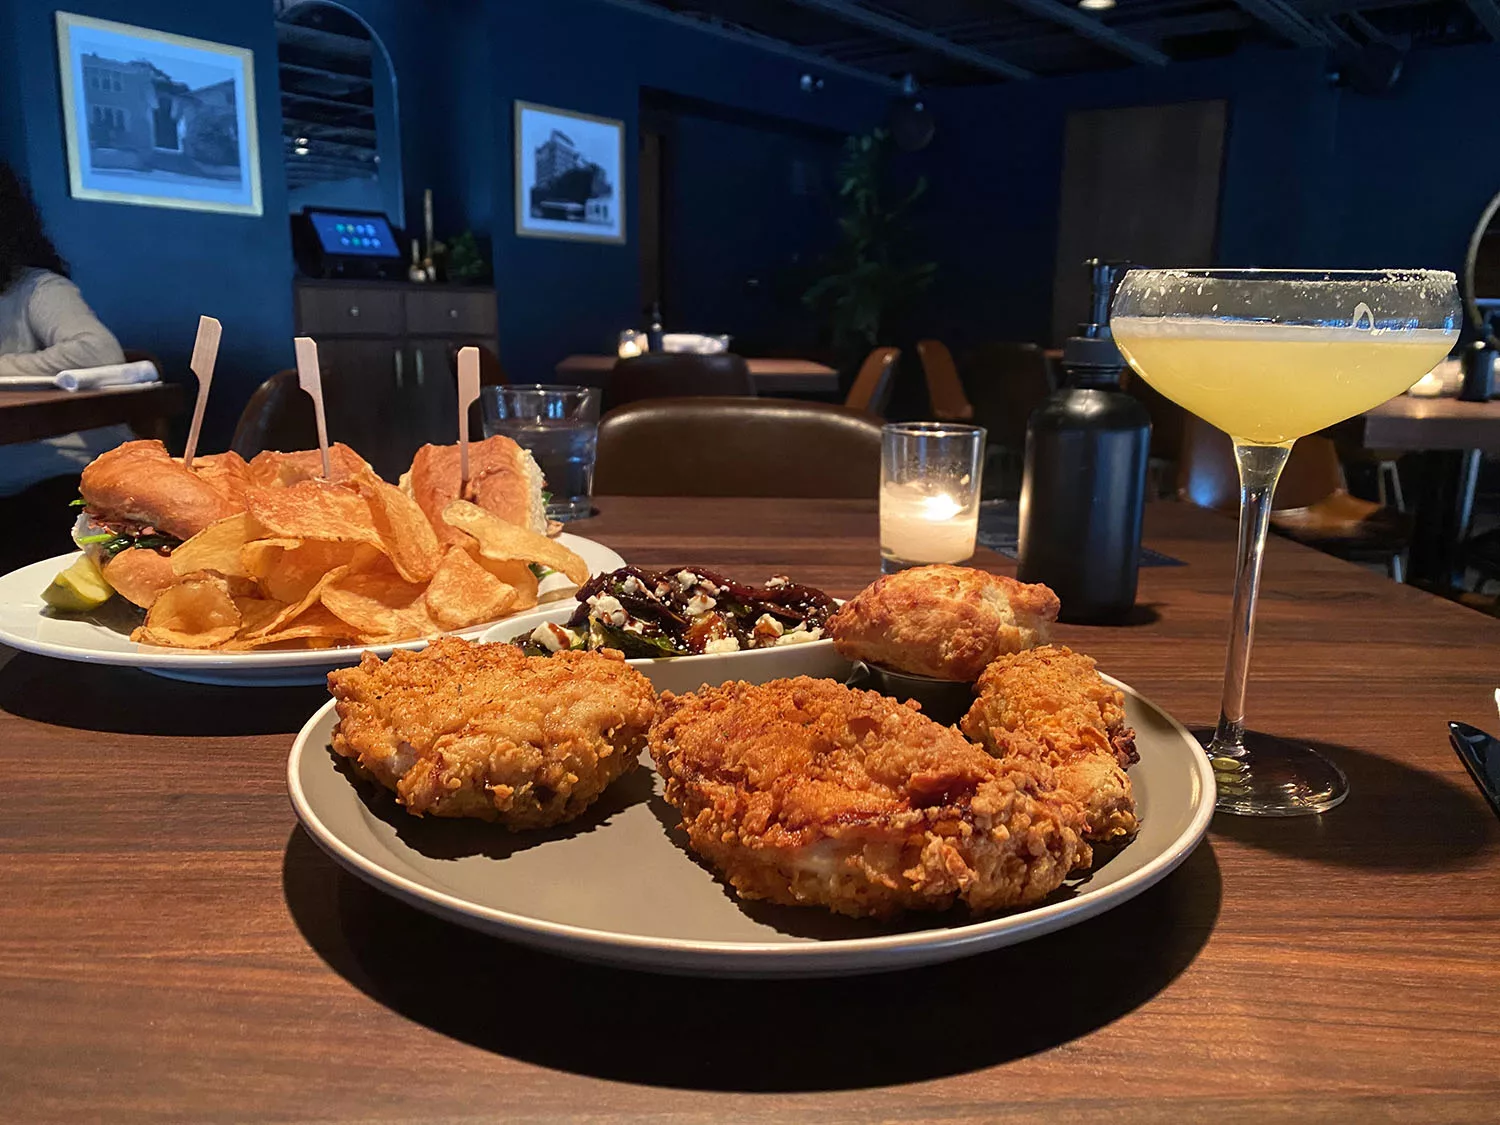 Fried chicken with sandwich and cocktails at The Belmont in Wichita, Kansas